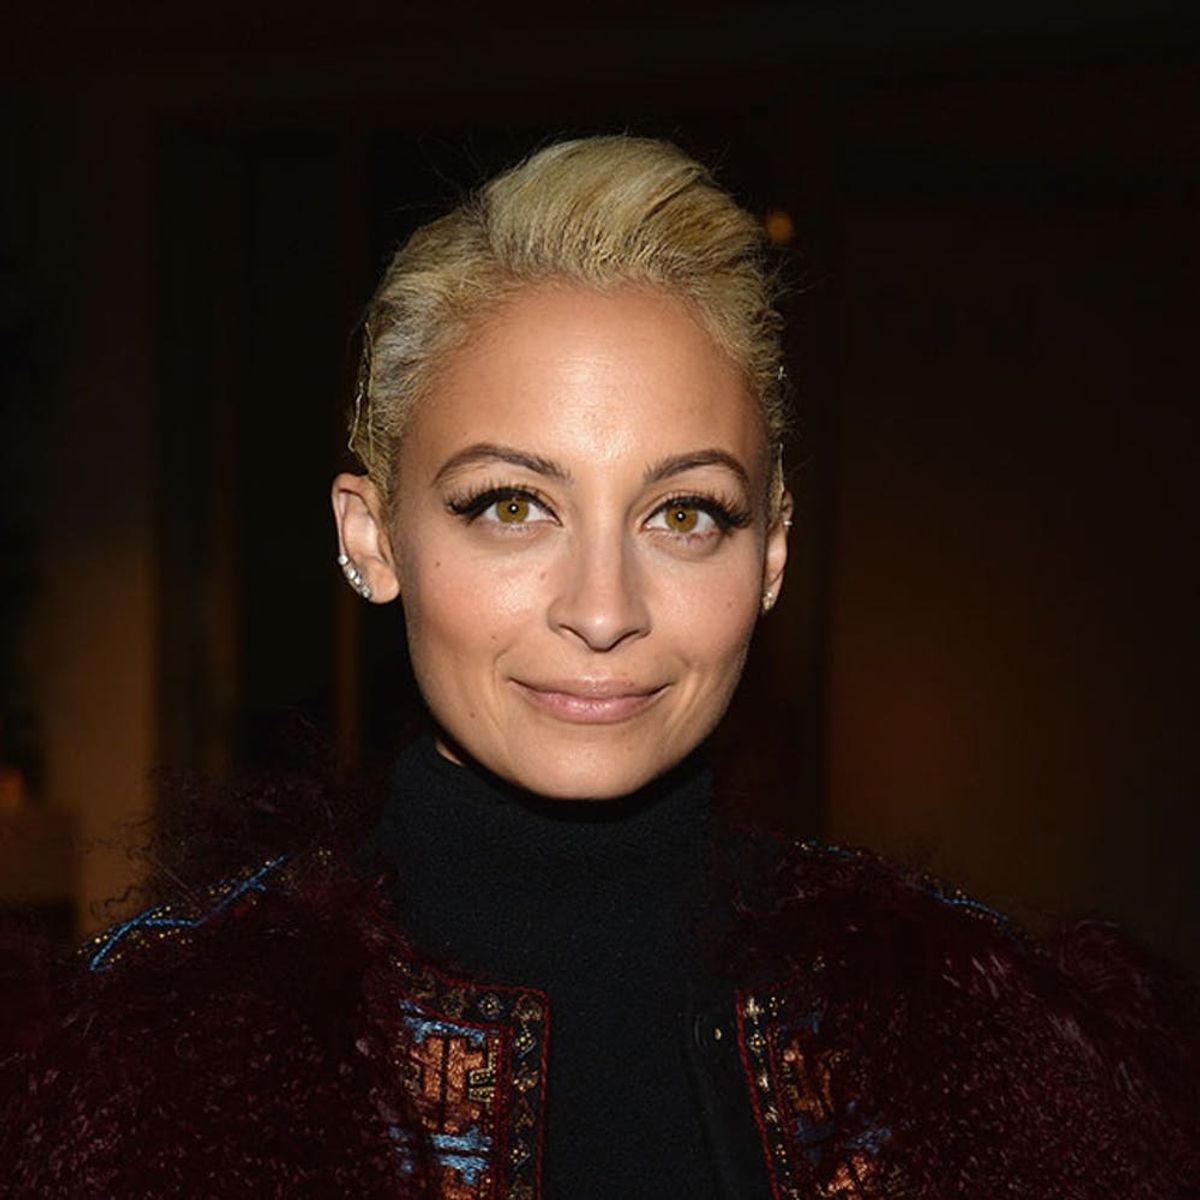 Nicole Richie’s New Hair Color Gives Off Serious Winter Vibes